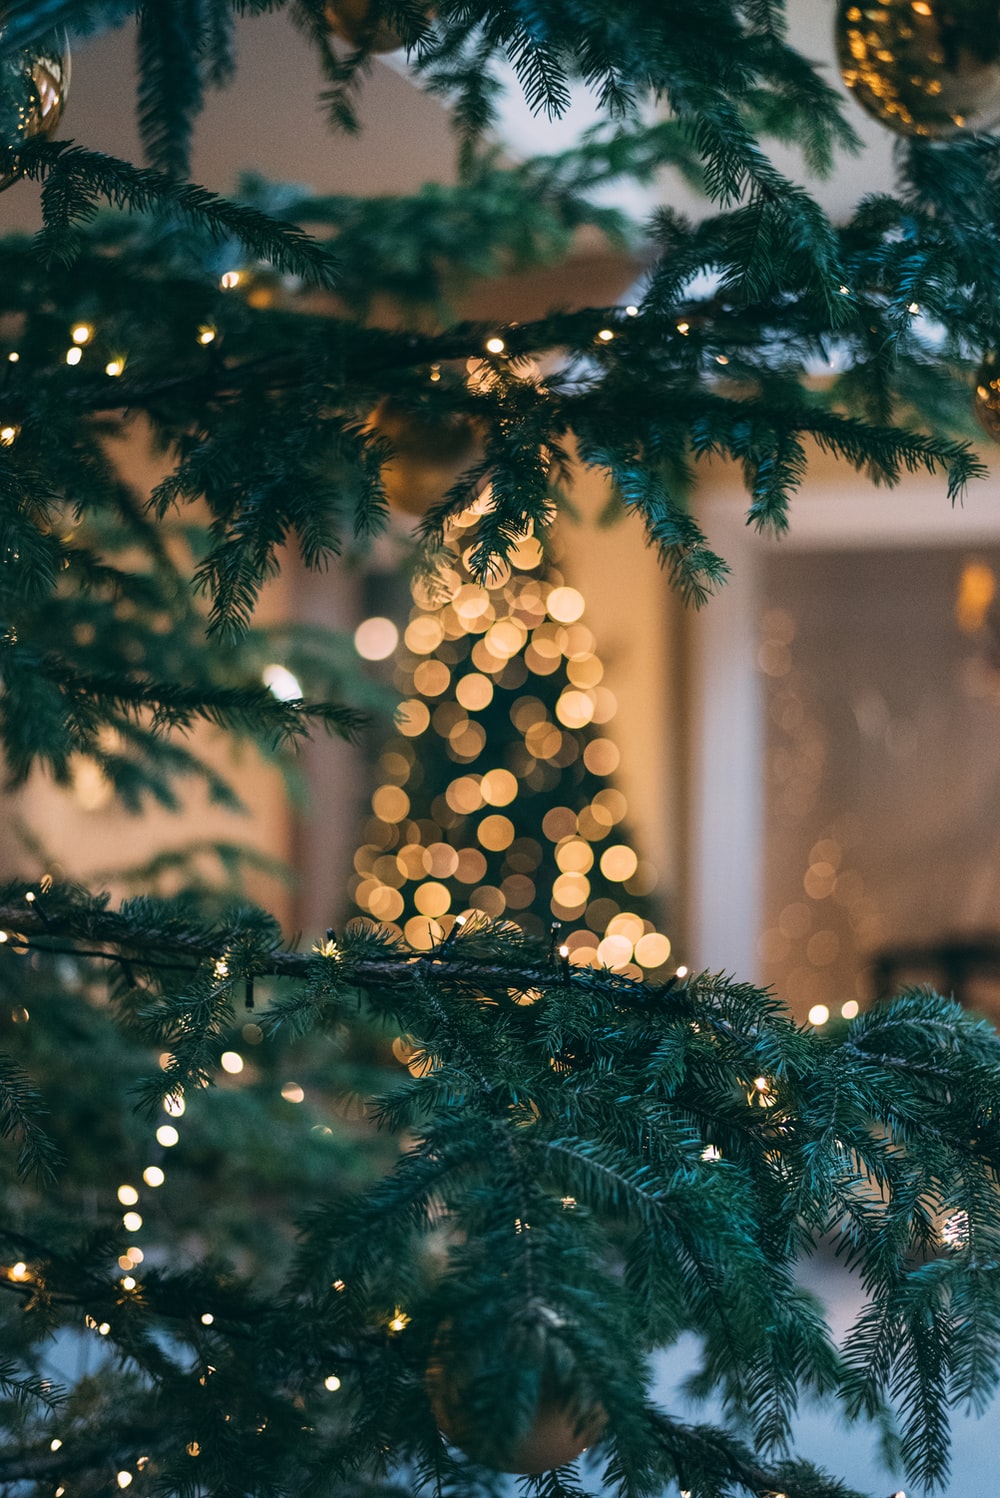 Christmas Trees Picture. Download Free Image